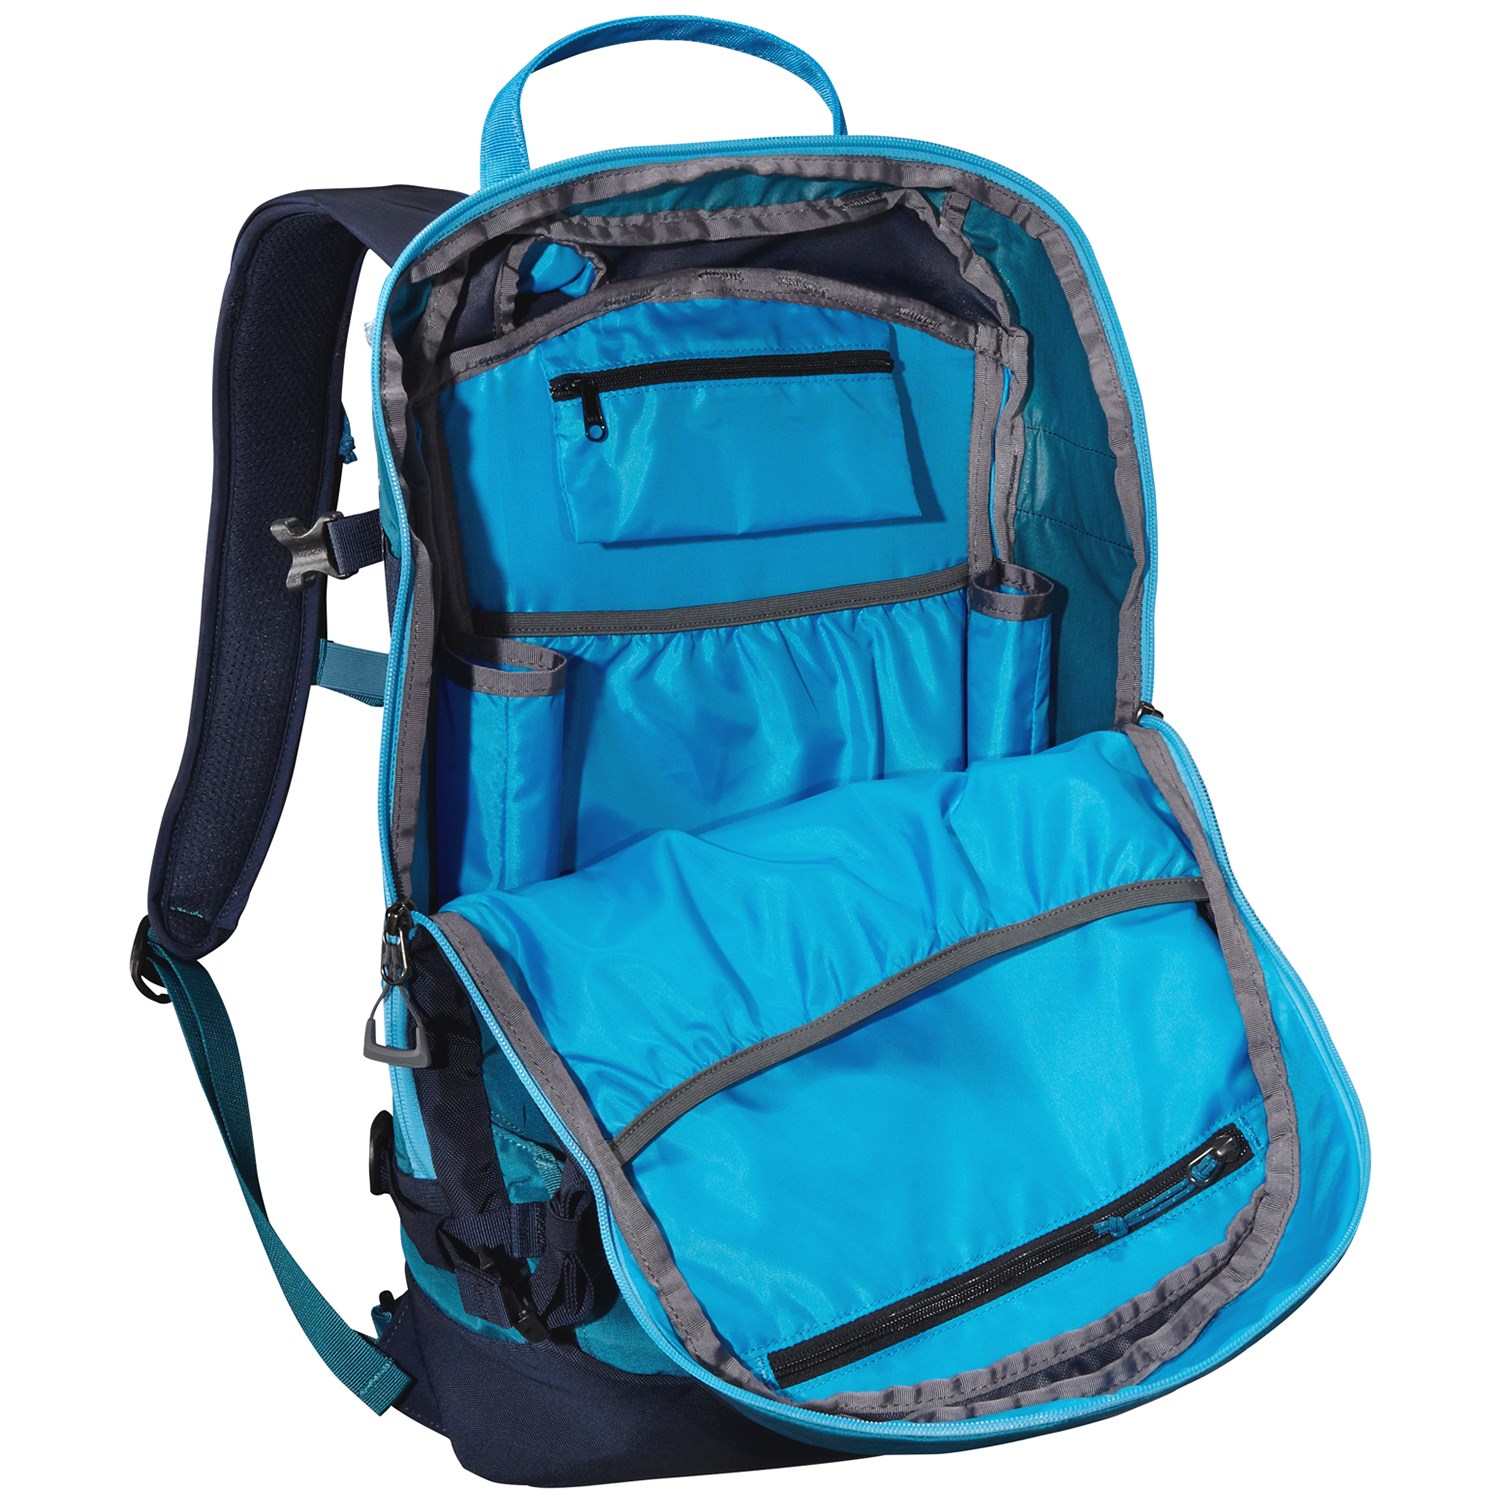 Patagonia Snow Drifter 20L Backpack